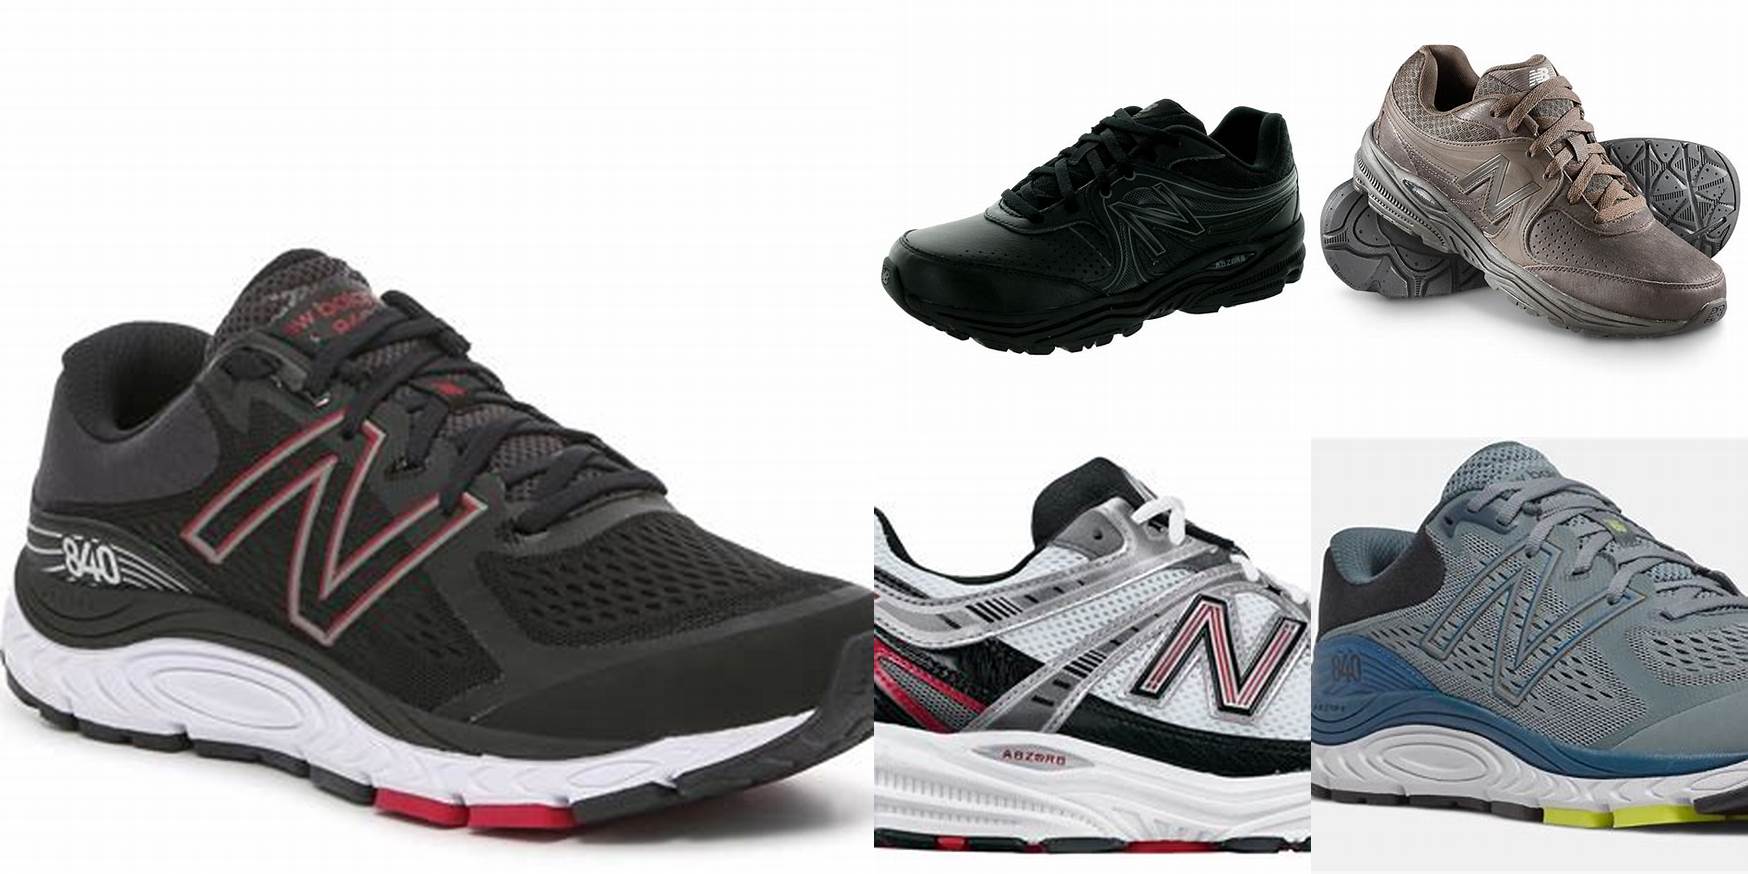 Is New Balance 840 A Stability Shoe